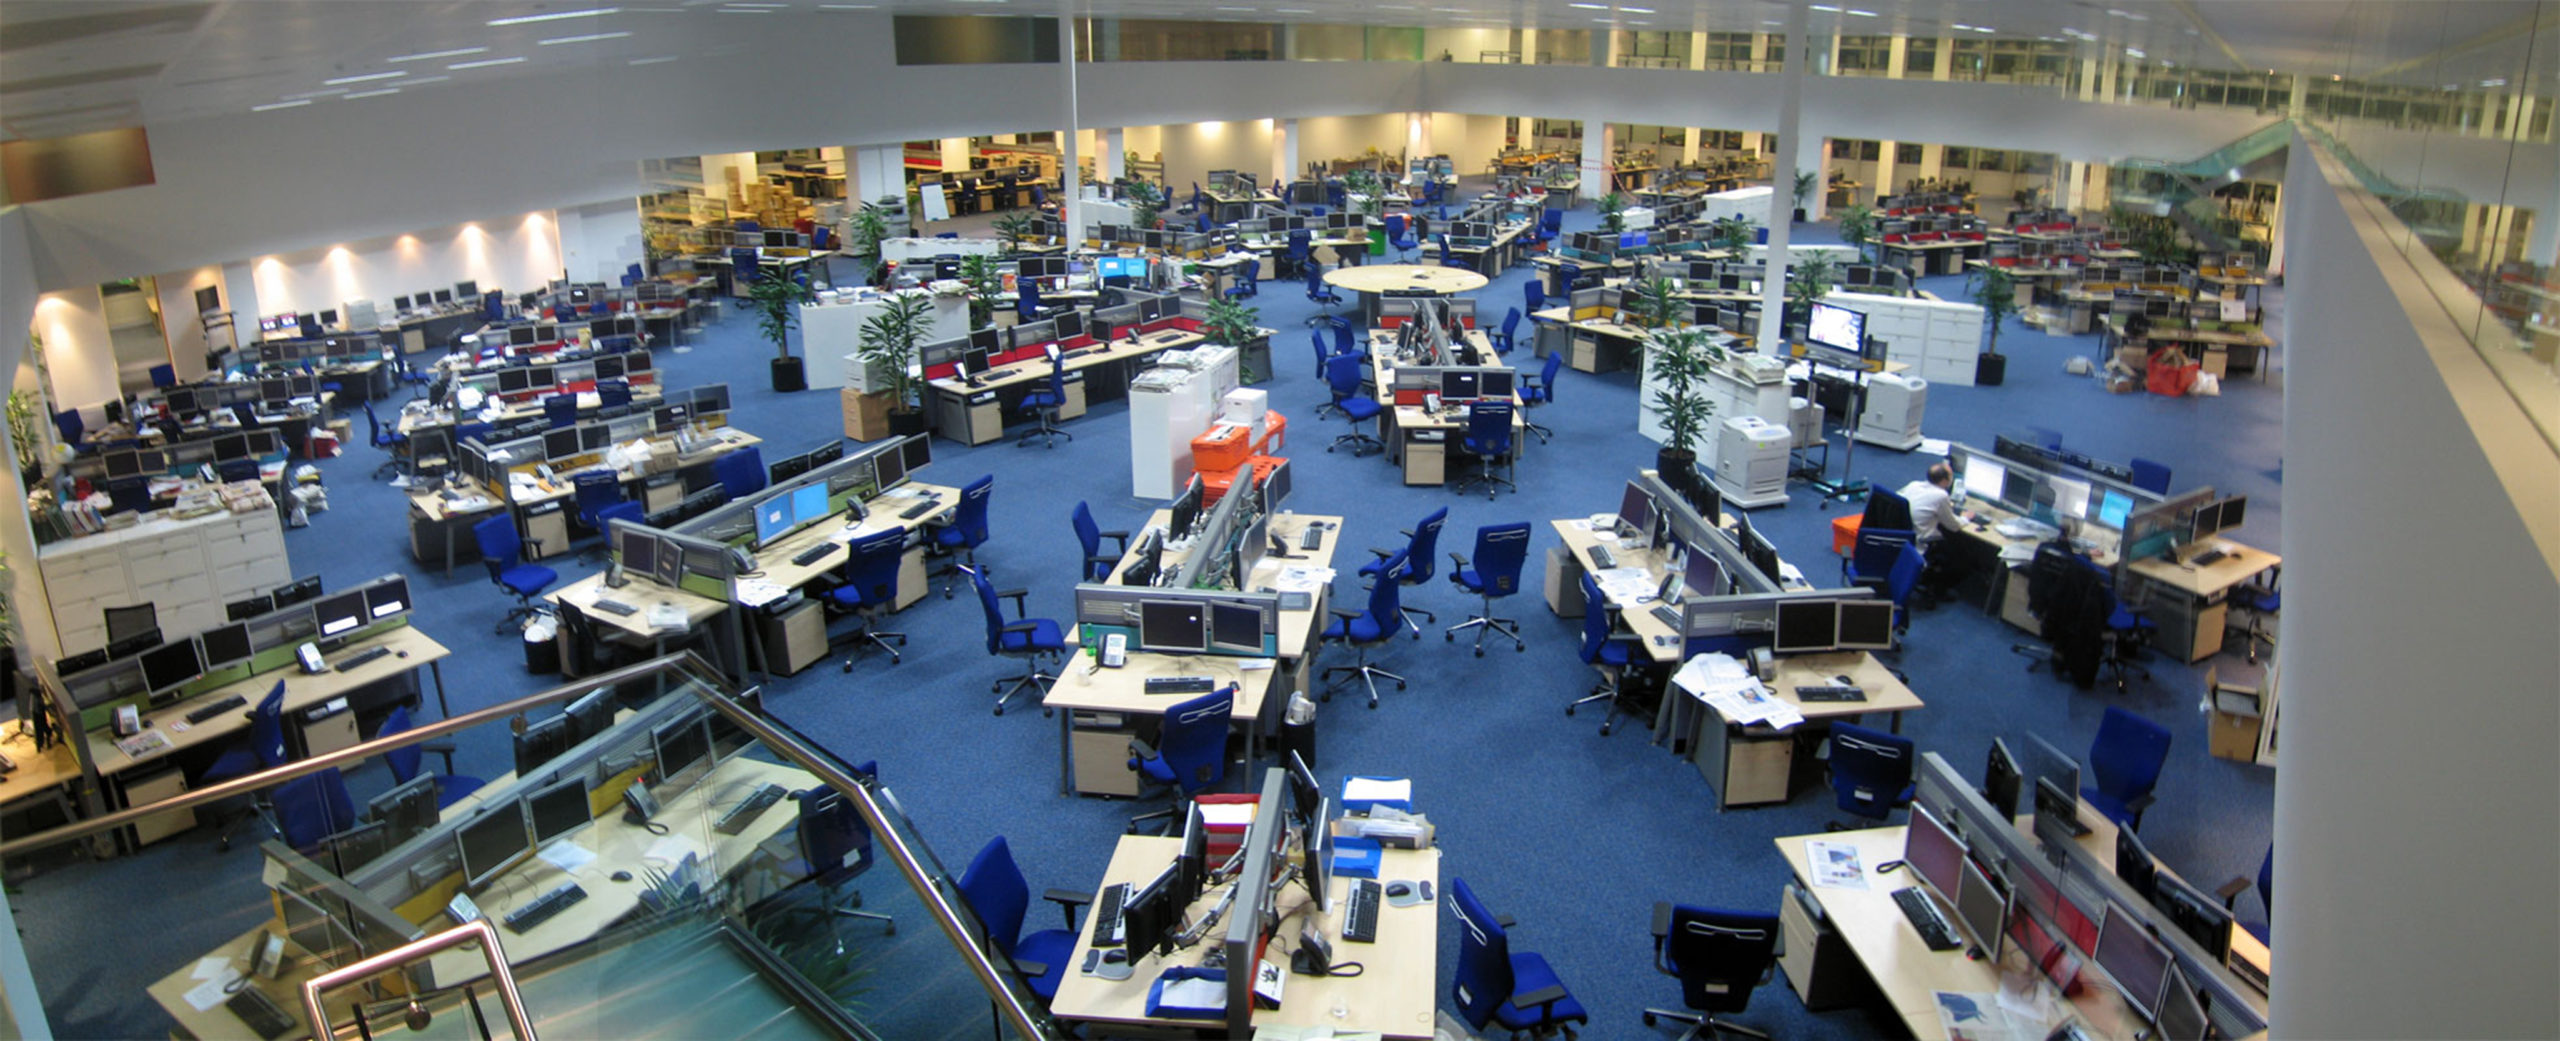 A large open news room with enough space to seat about 200 employees.